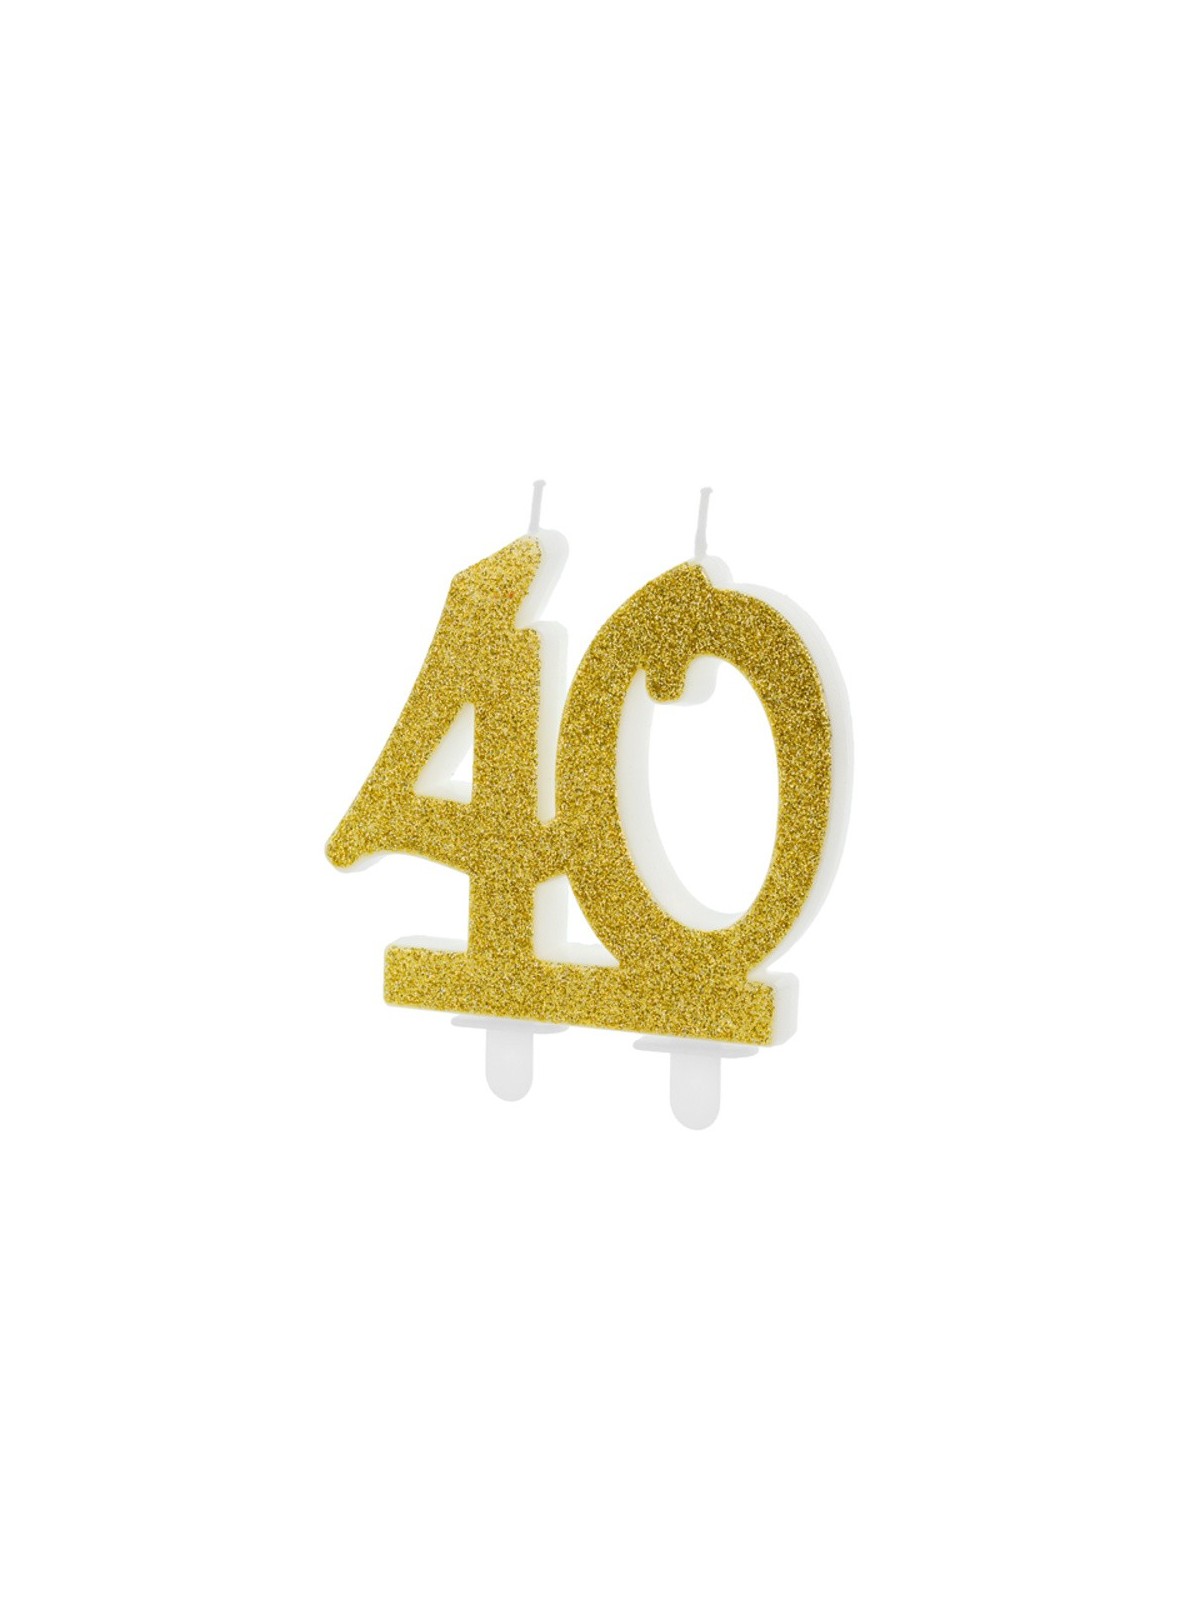 PartyDeco jubilee candle large - glitter gold - 40